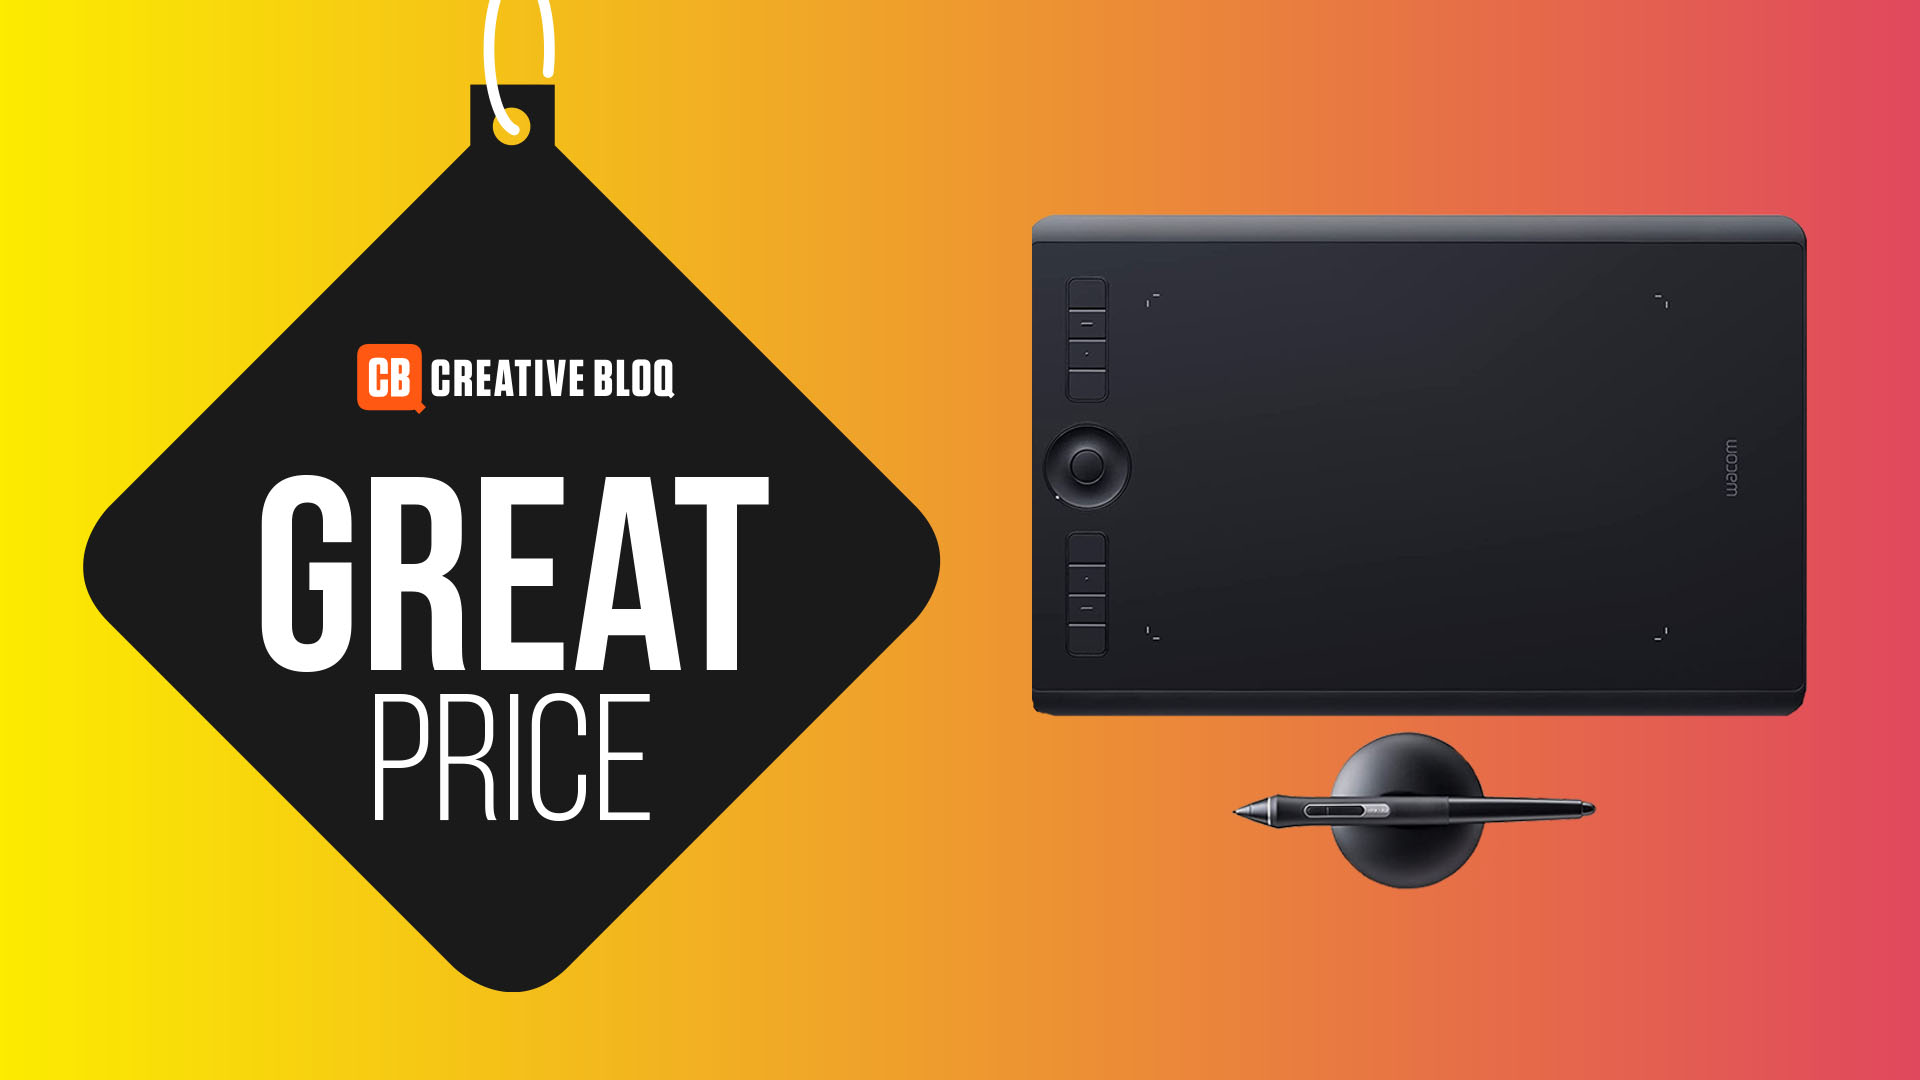 Wacom Intuos Pro's price now slashed by 20% | Creative Bloq